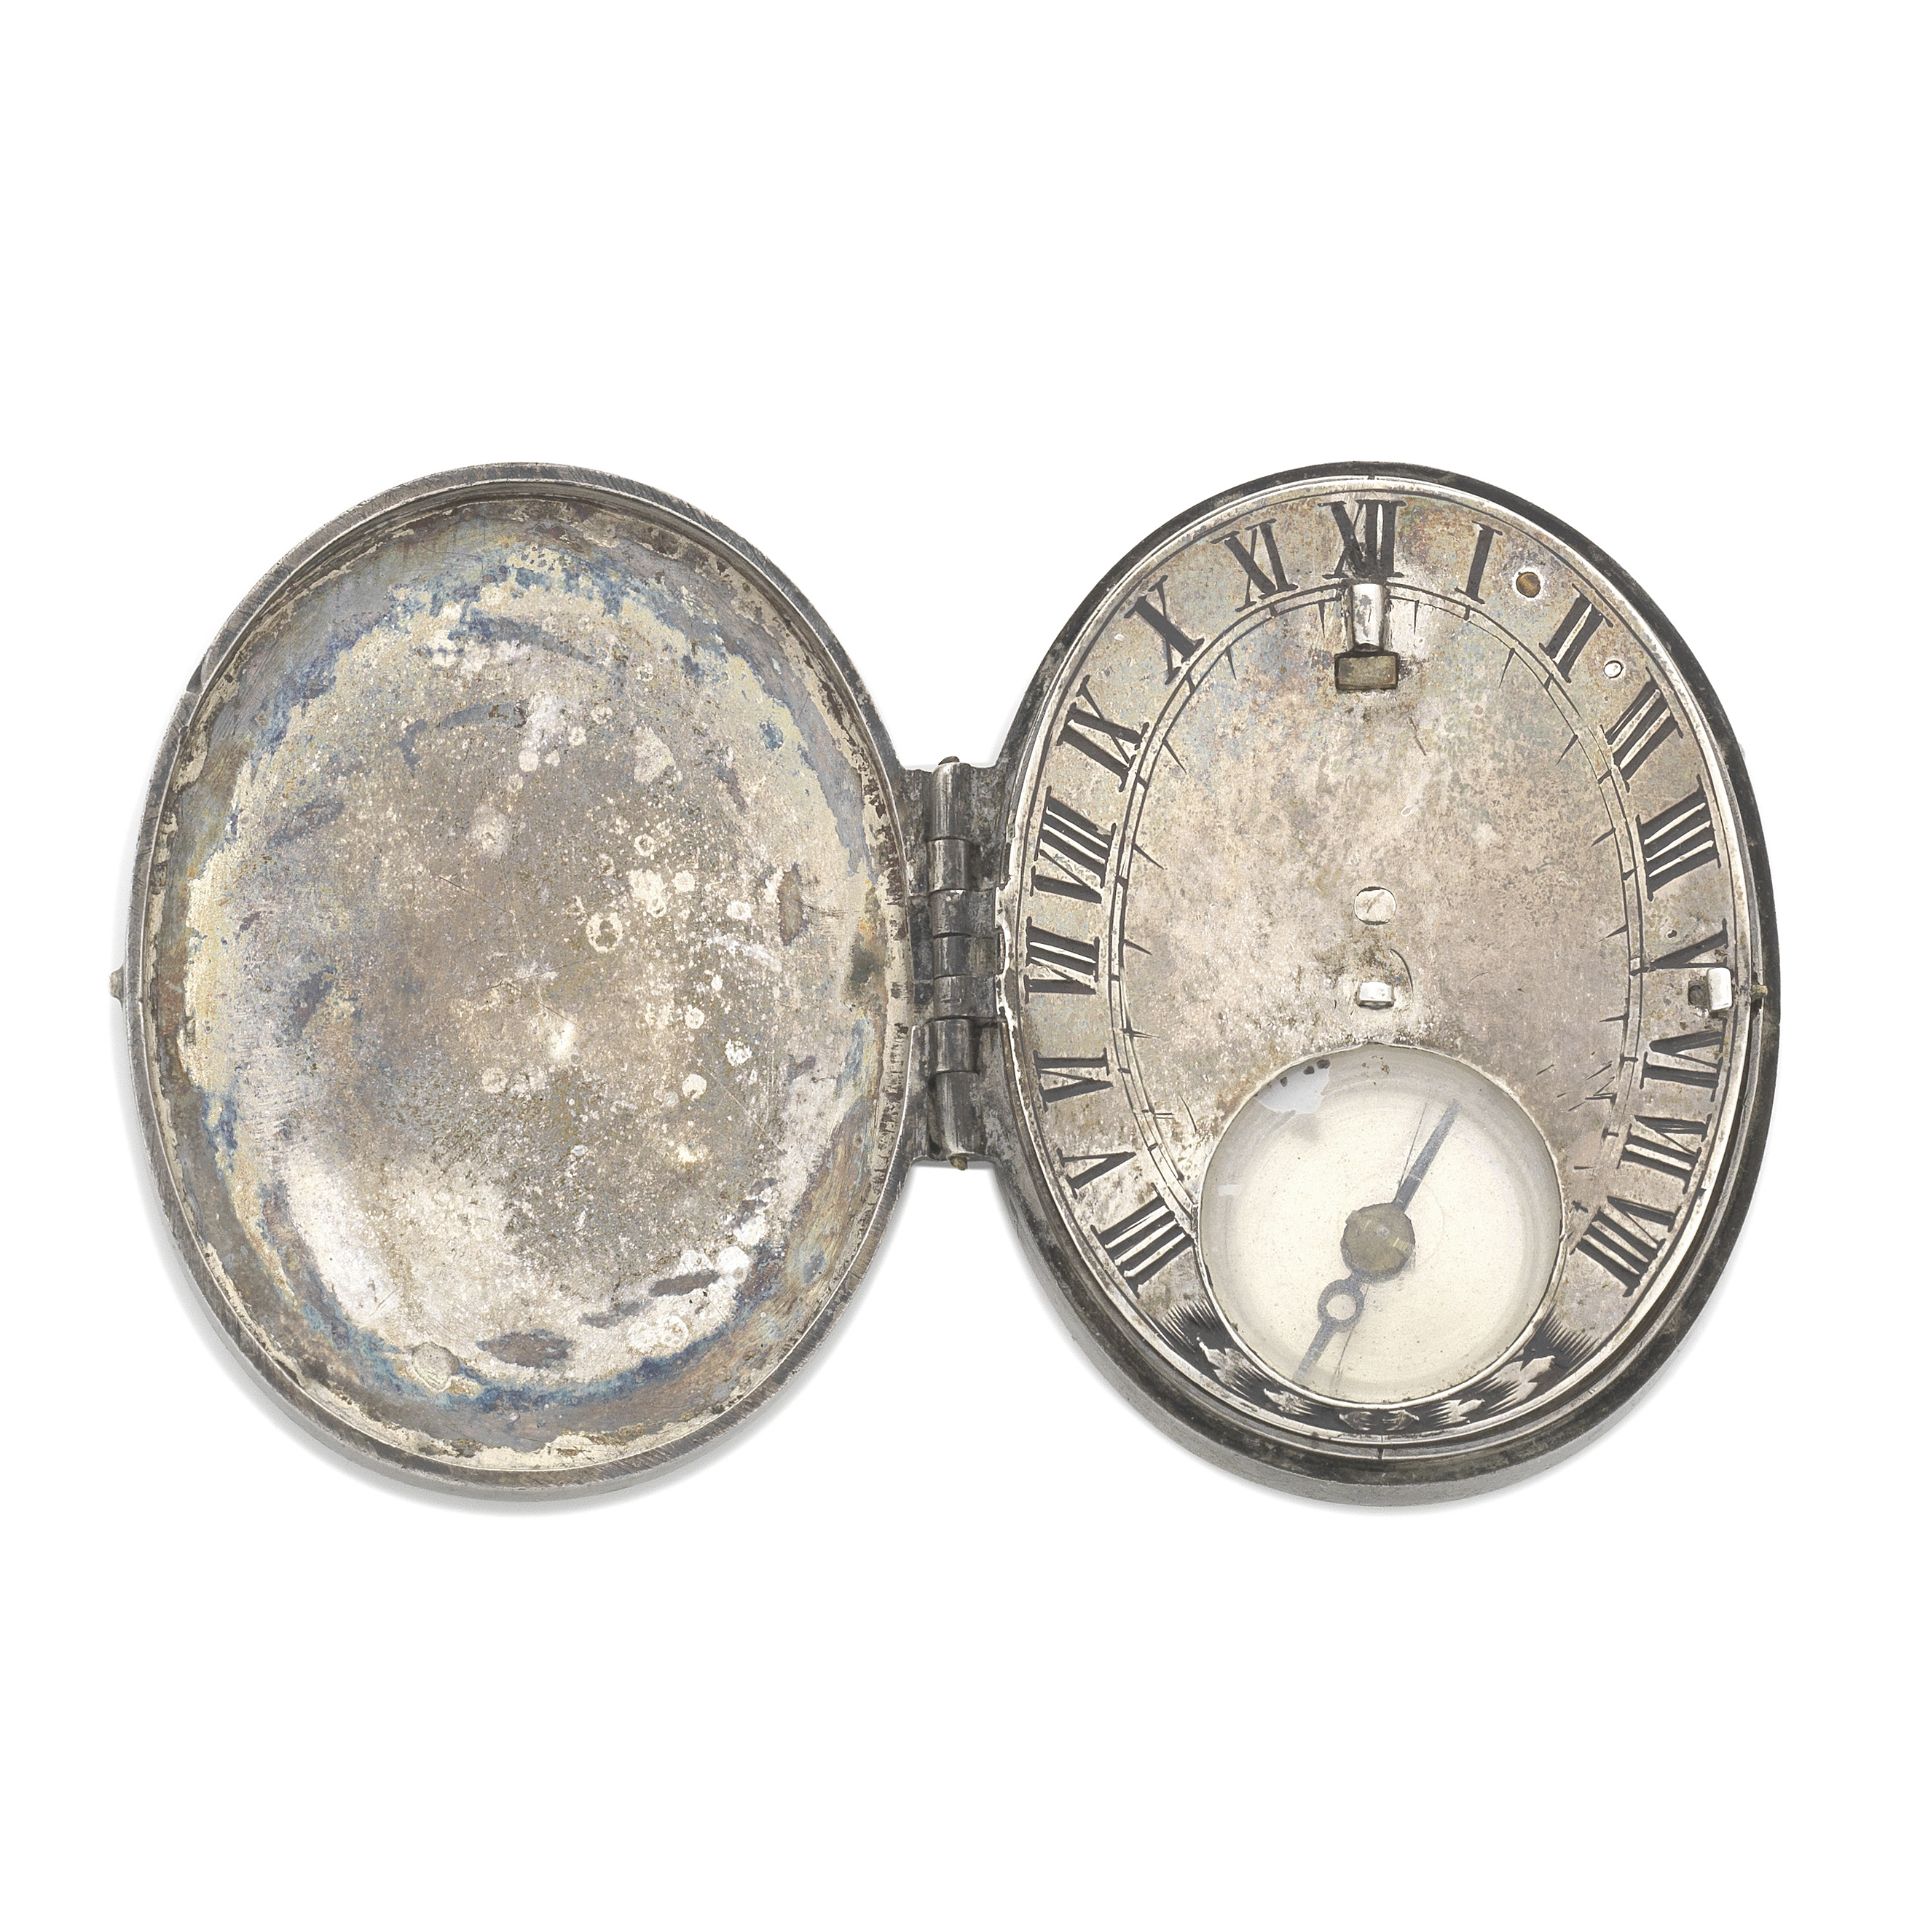 An miniature silver pocket sundial in pair case, probably English, late 17th century,